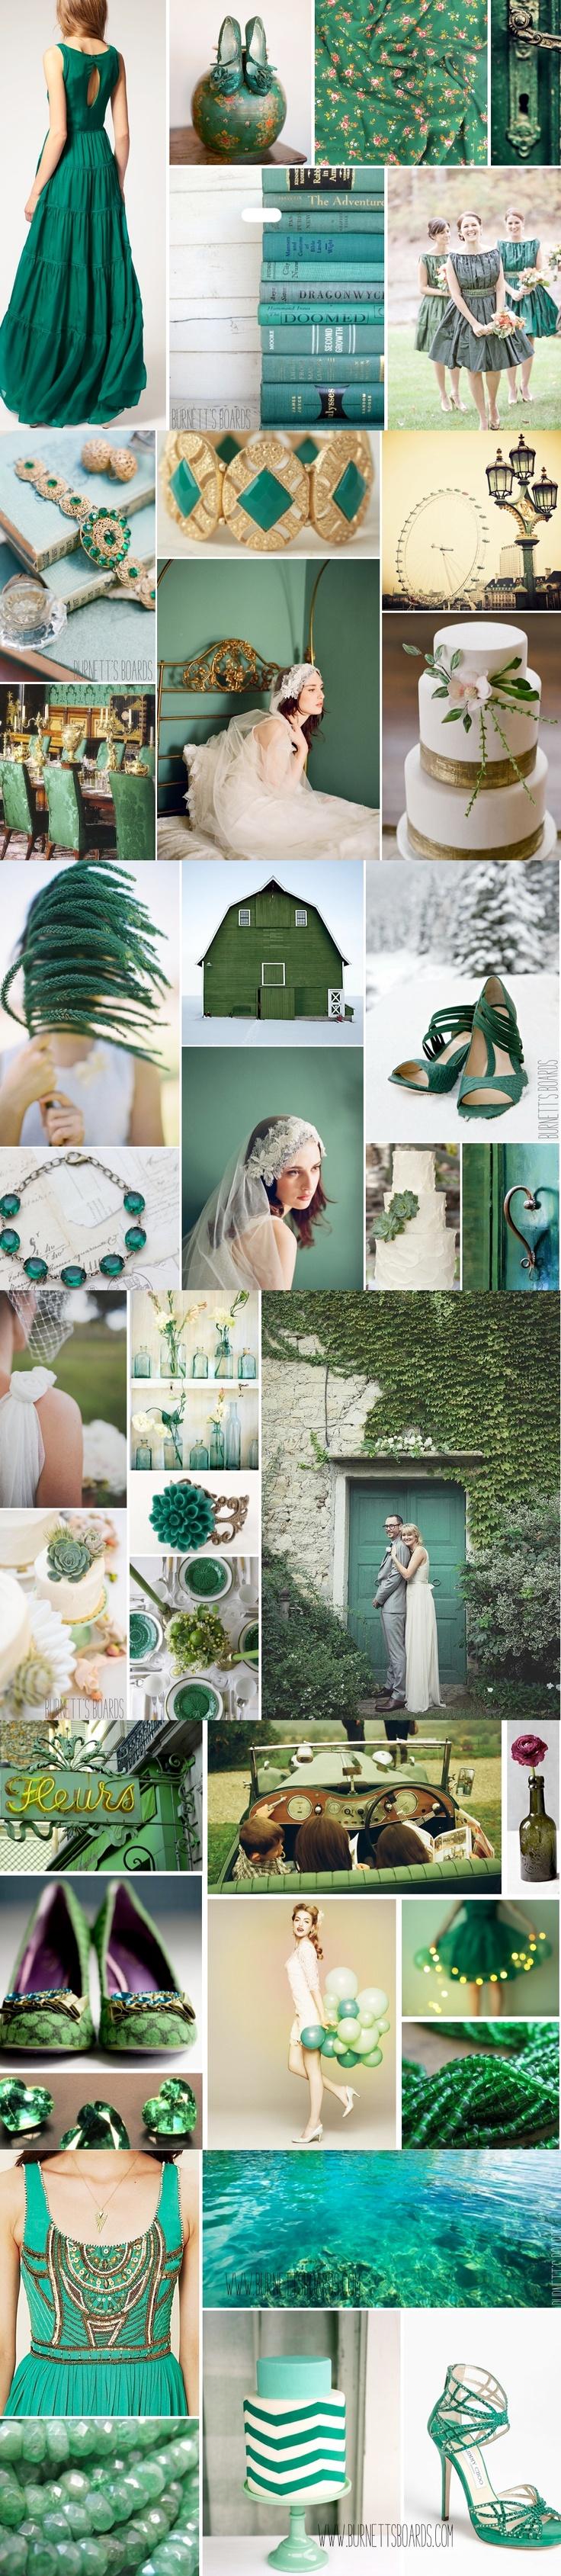 Wedding - It’s Official – Pantone’s Color Of The Year For 2013 Is Emerald!